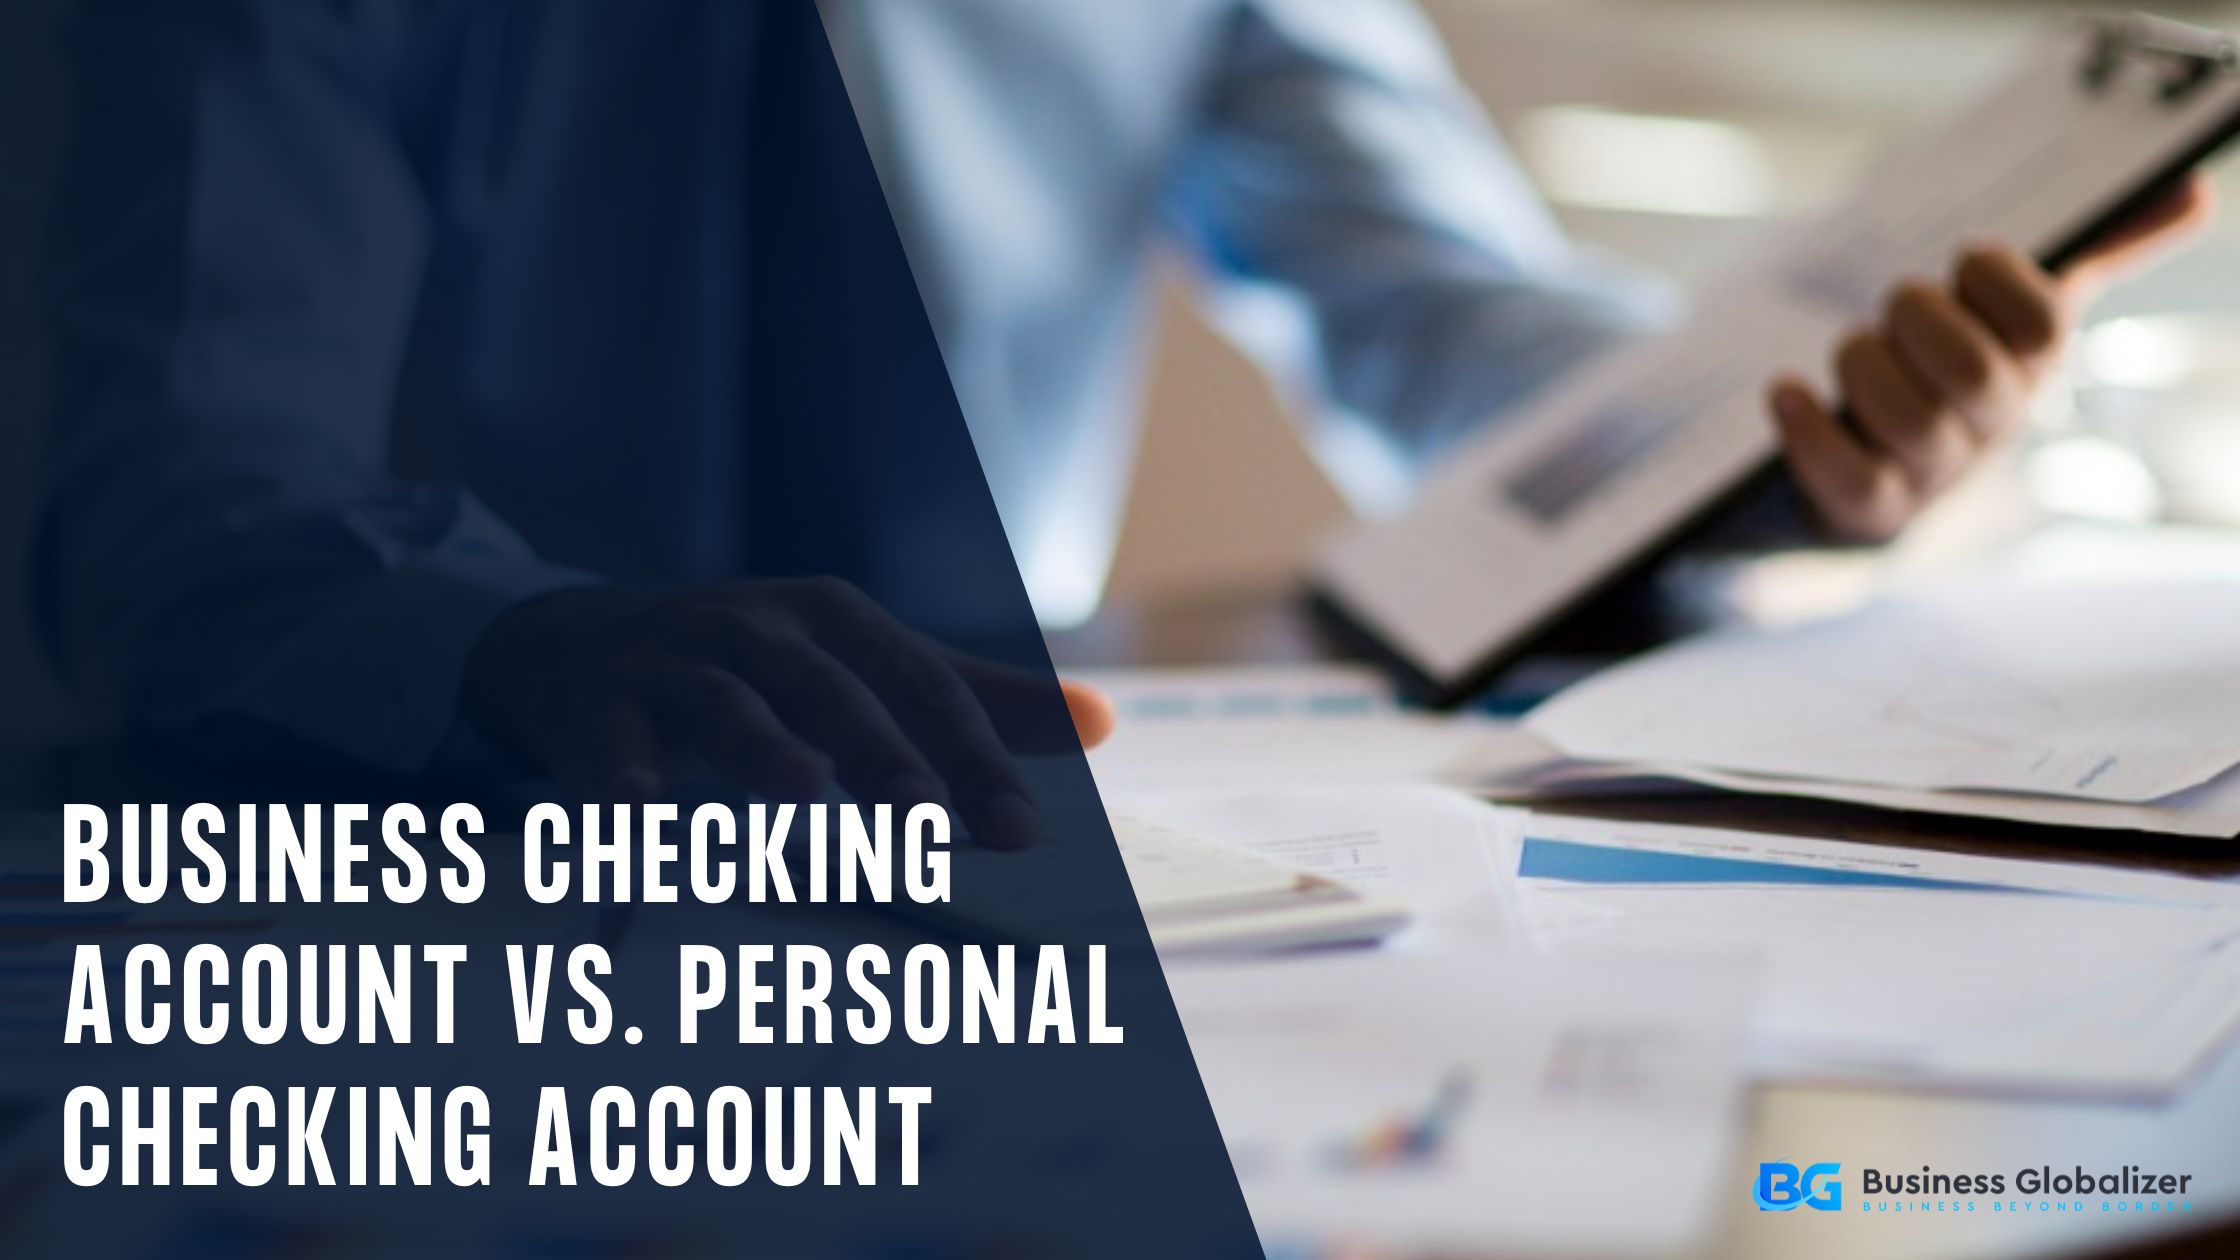 Business Checking Account Vs. Personal Checking Account